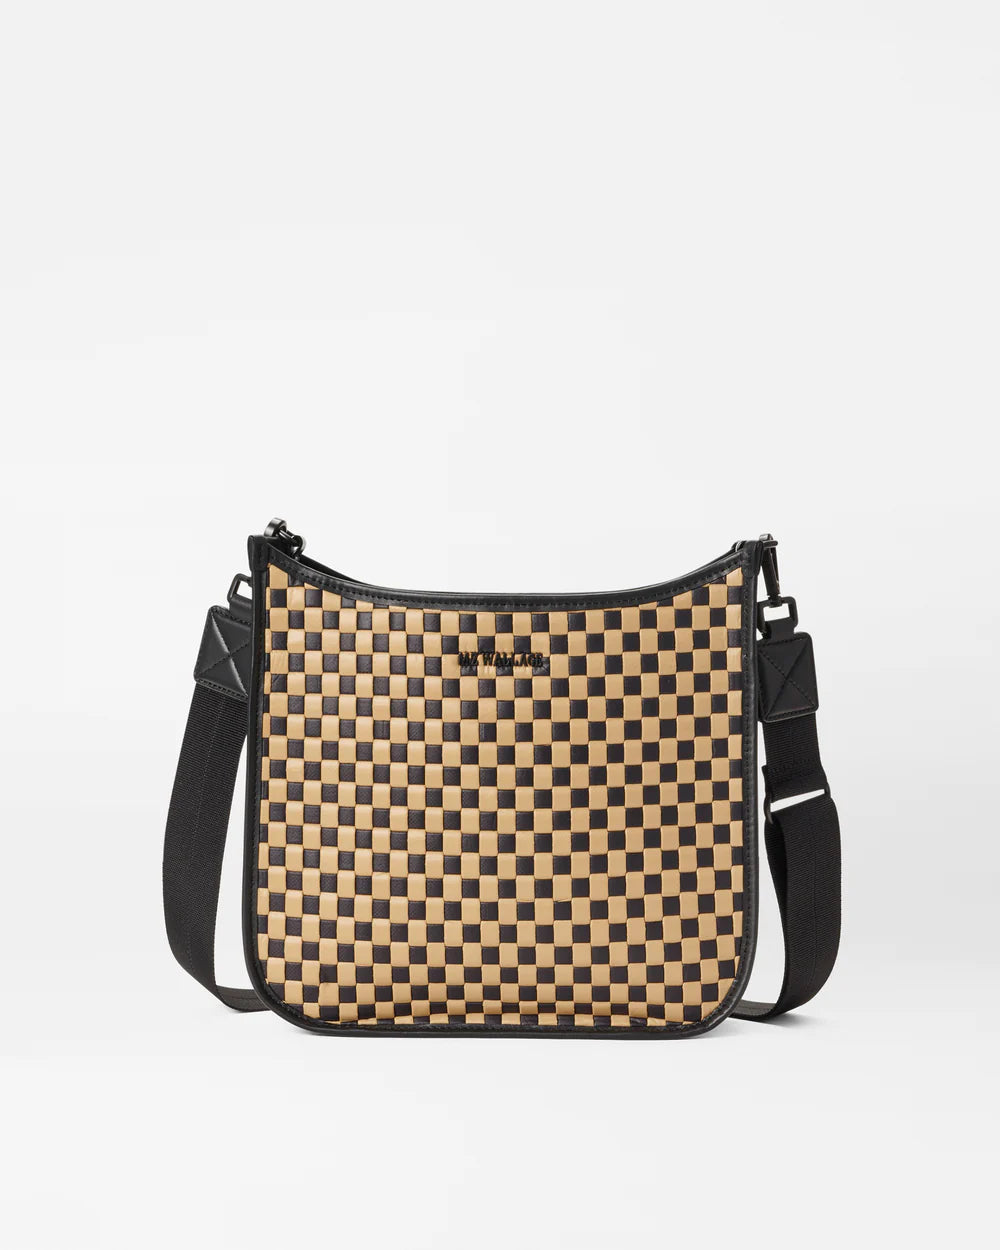 MZ WALLACE WOVEN BOX CROSSBODY IN CAMEL AND BLACK